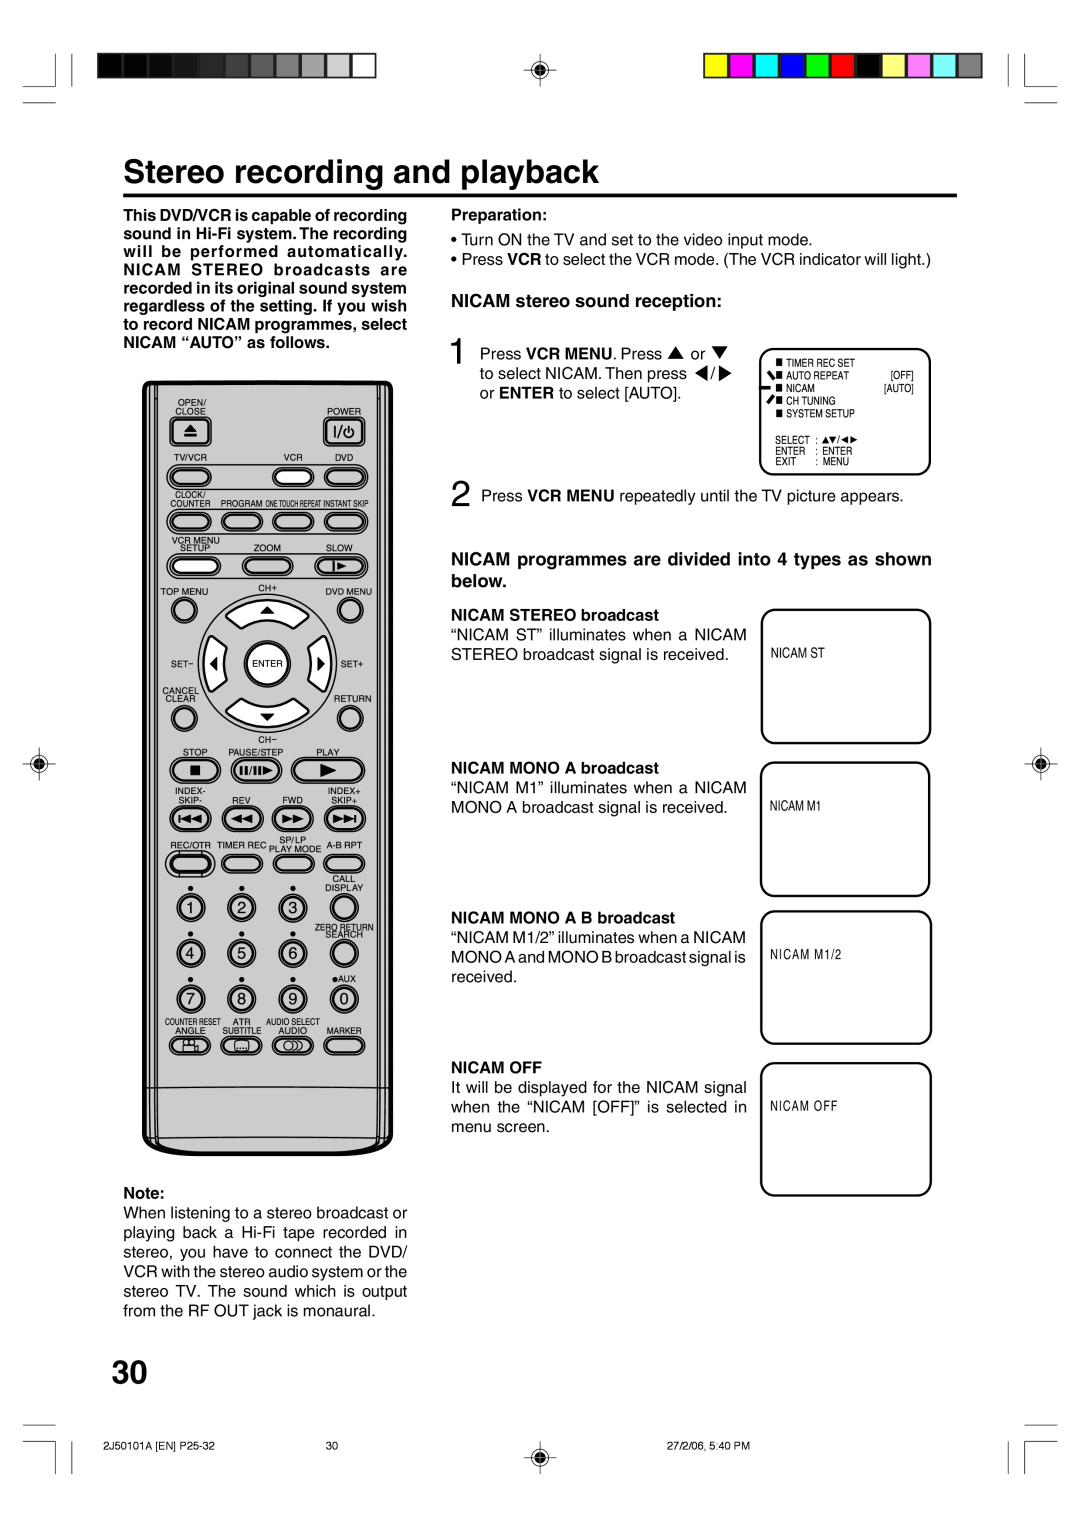 Toshiba SD-37VBSB manual Stereo recording and playback, NICAM stereo sound reception, Preparation, NICAM STEREO broadcast 